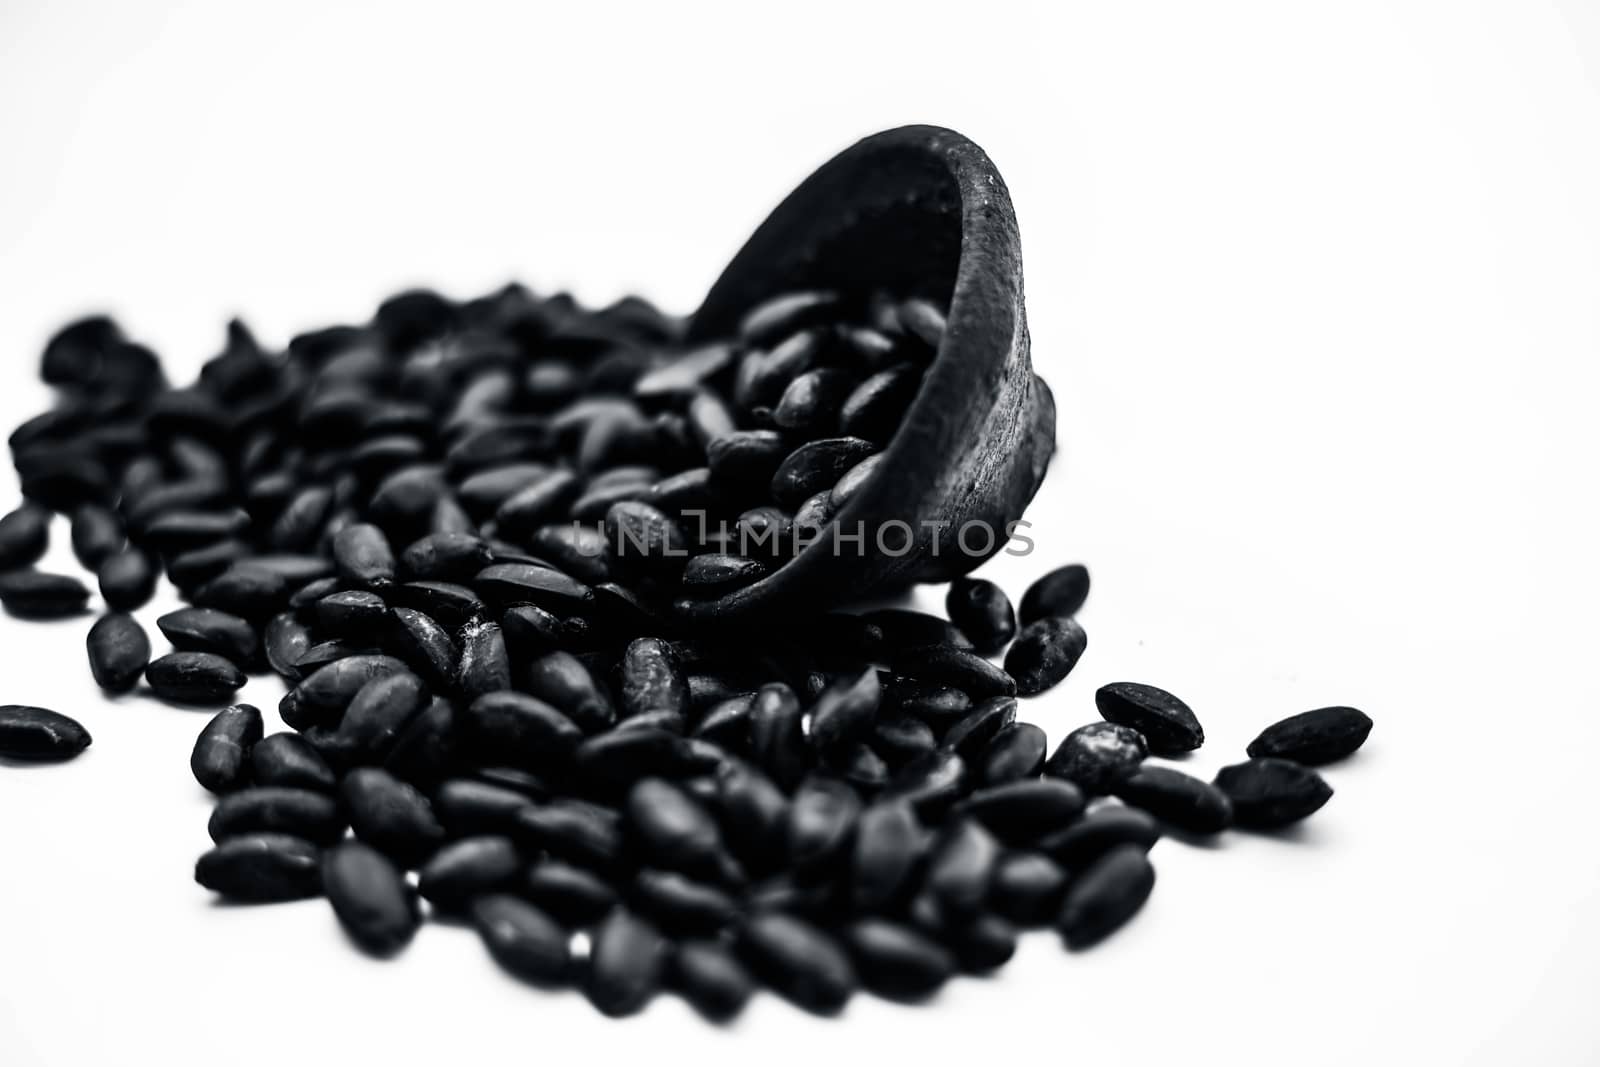 Close up of brown colored dried custard apples or sitaphal or sugar apple seeds in a black colored clay bowl isolated on white.